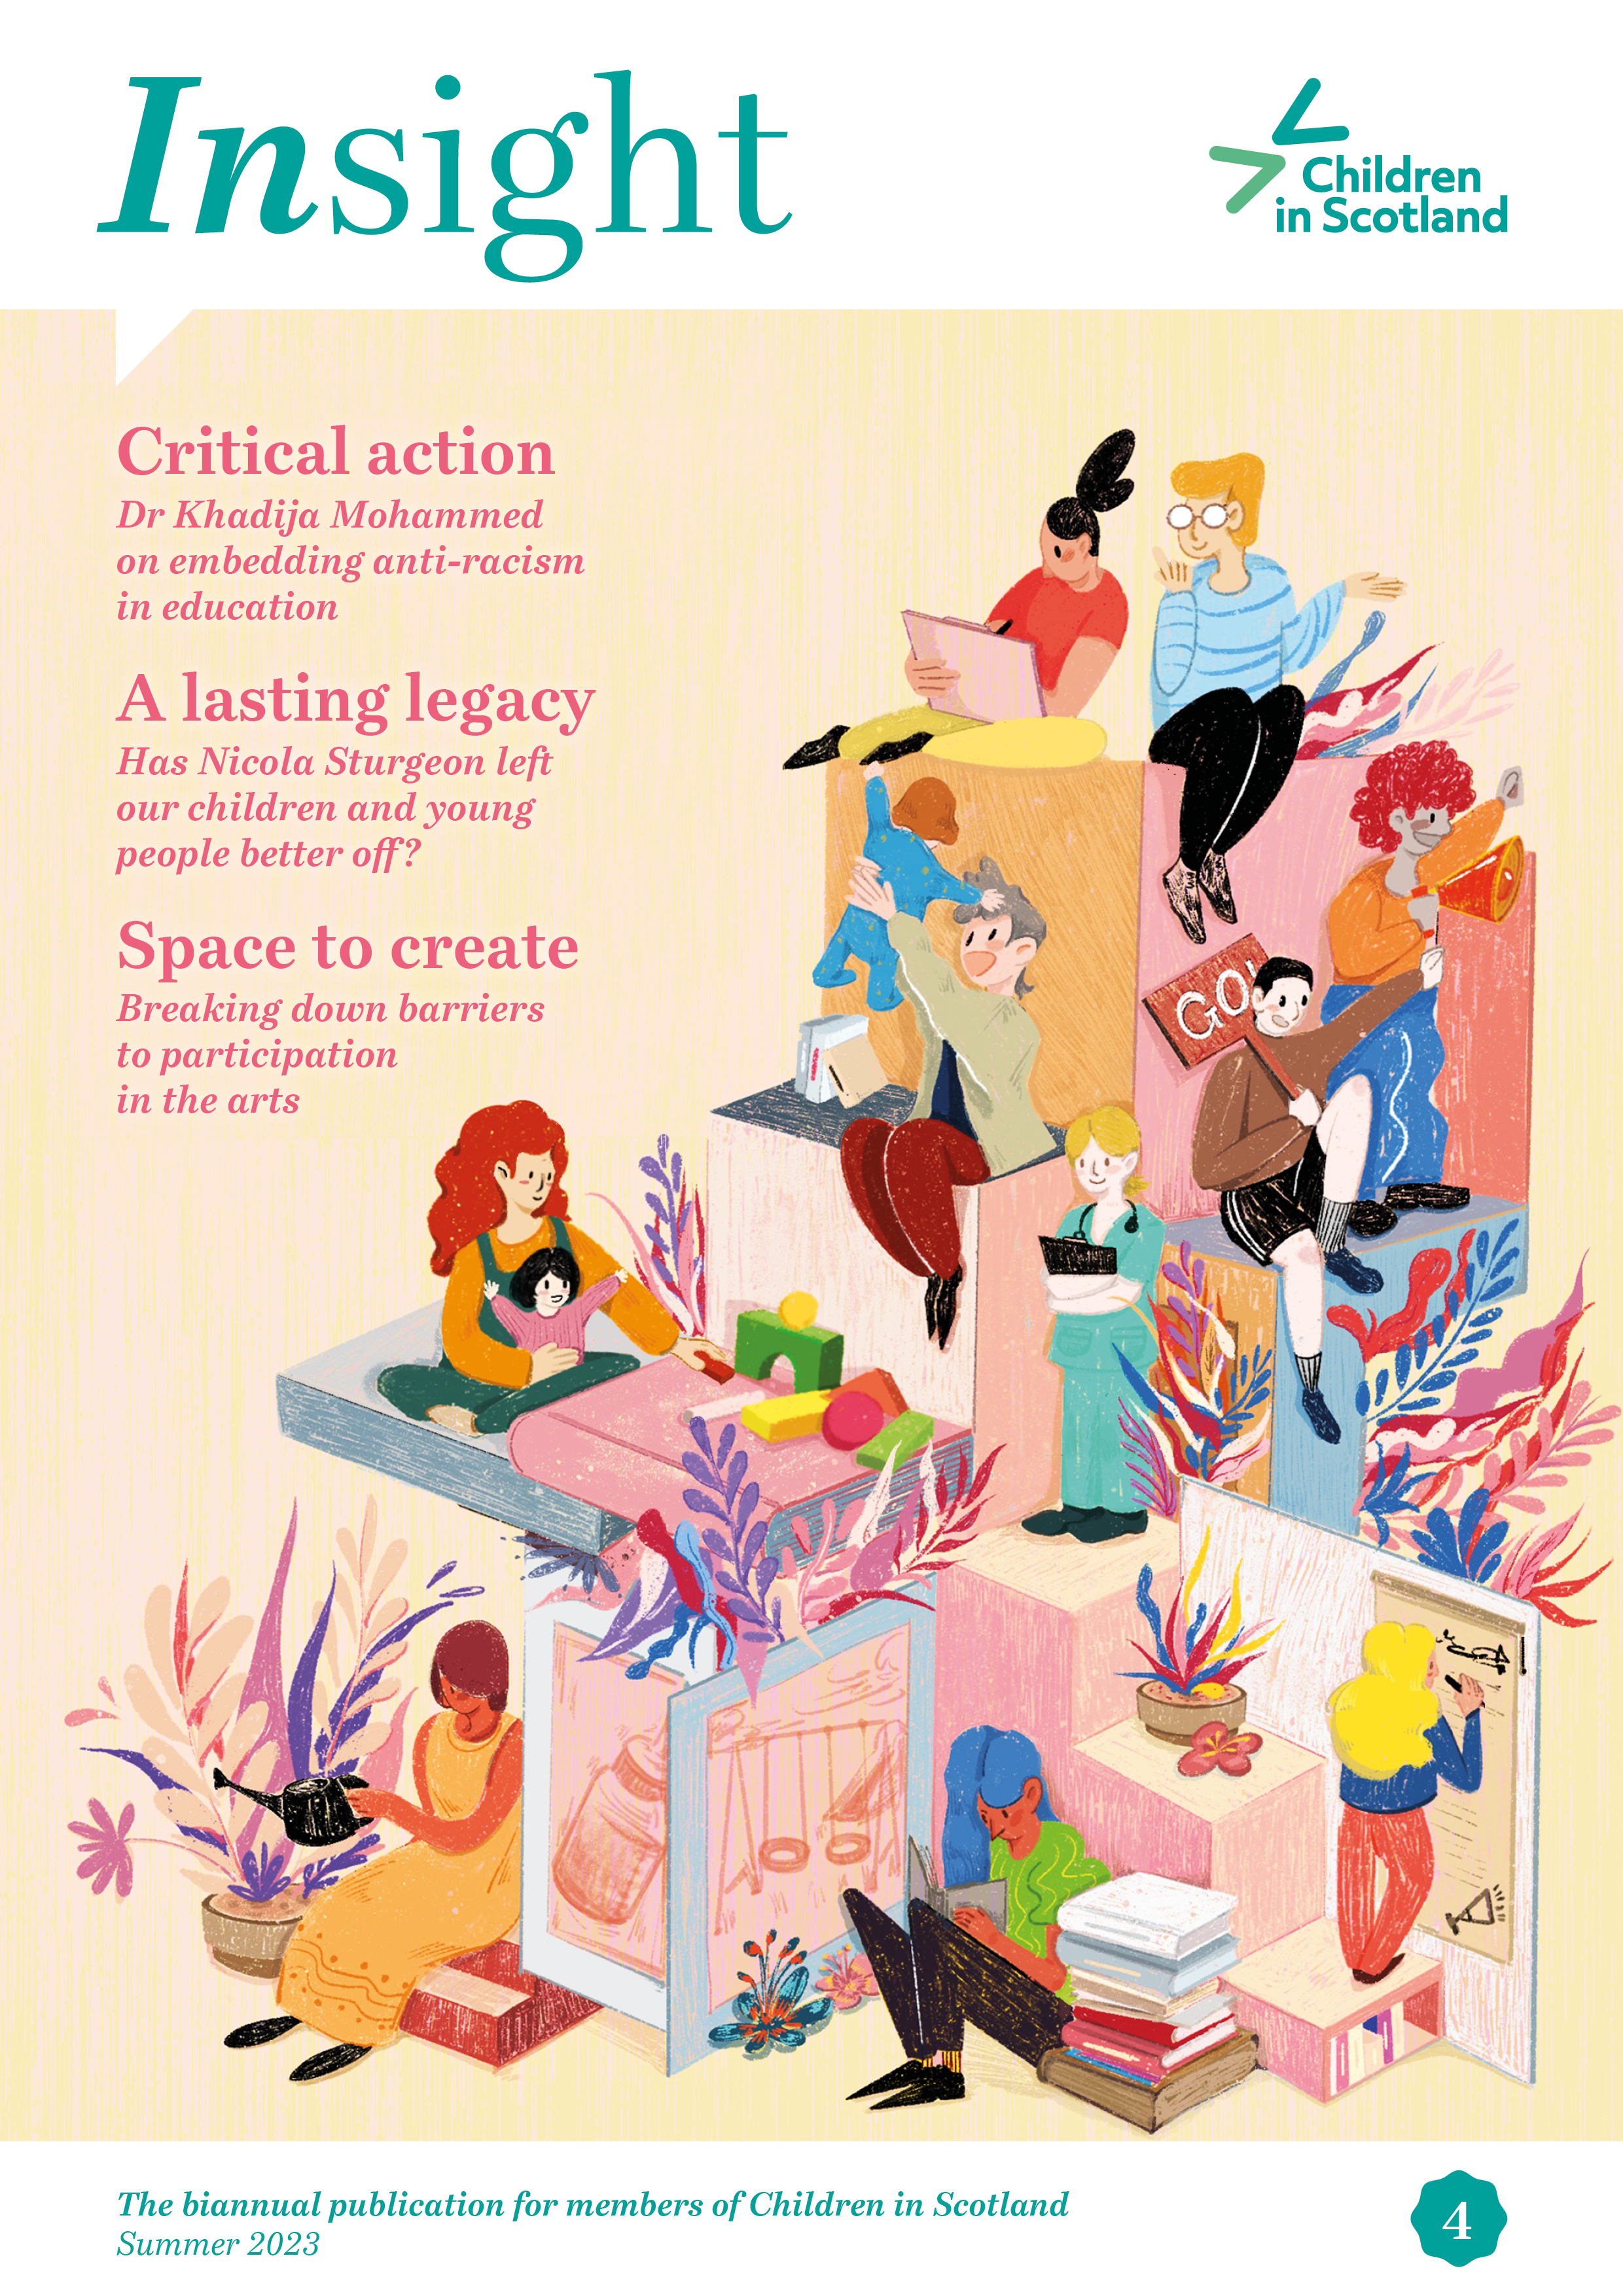 Image shows the cover of issue 4 of Inight magazine, the magazine for members of Children in Scotland. Cover shows colourful illustration image of members from a variety of professions.